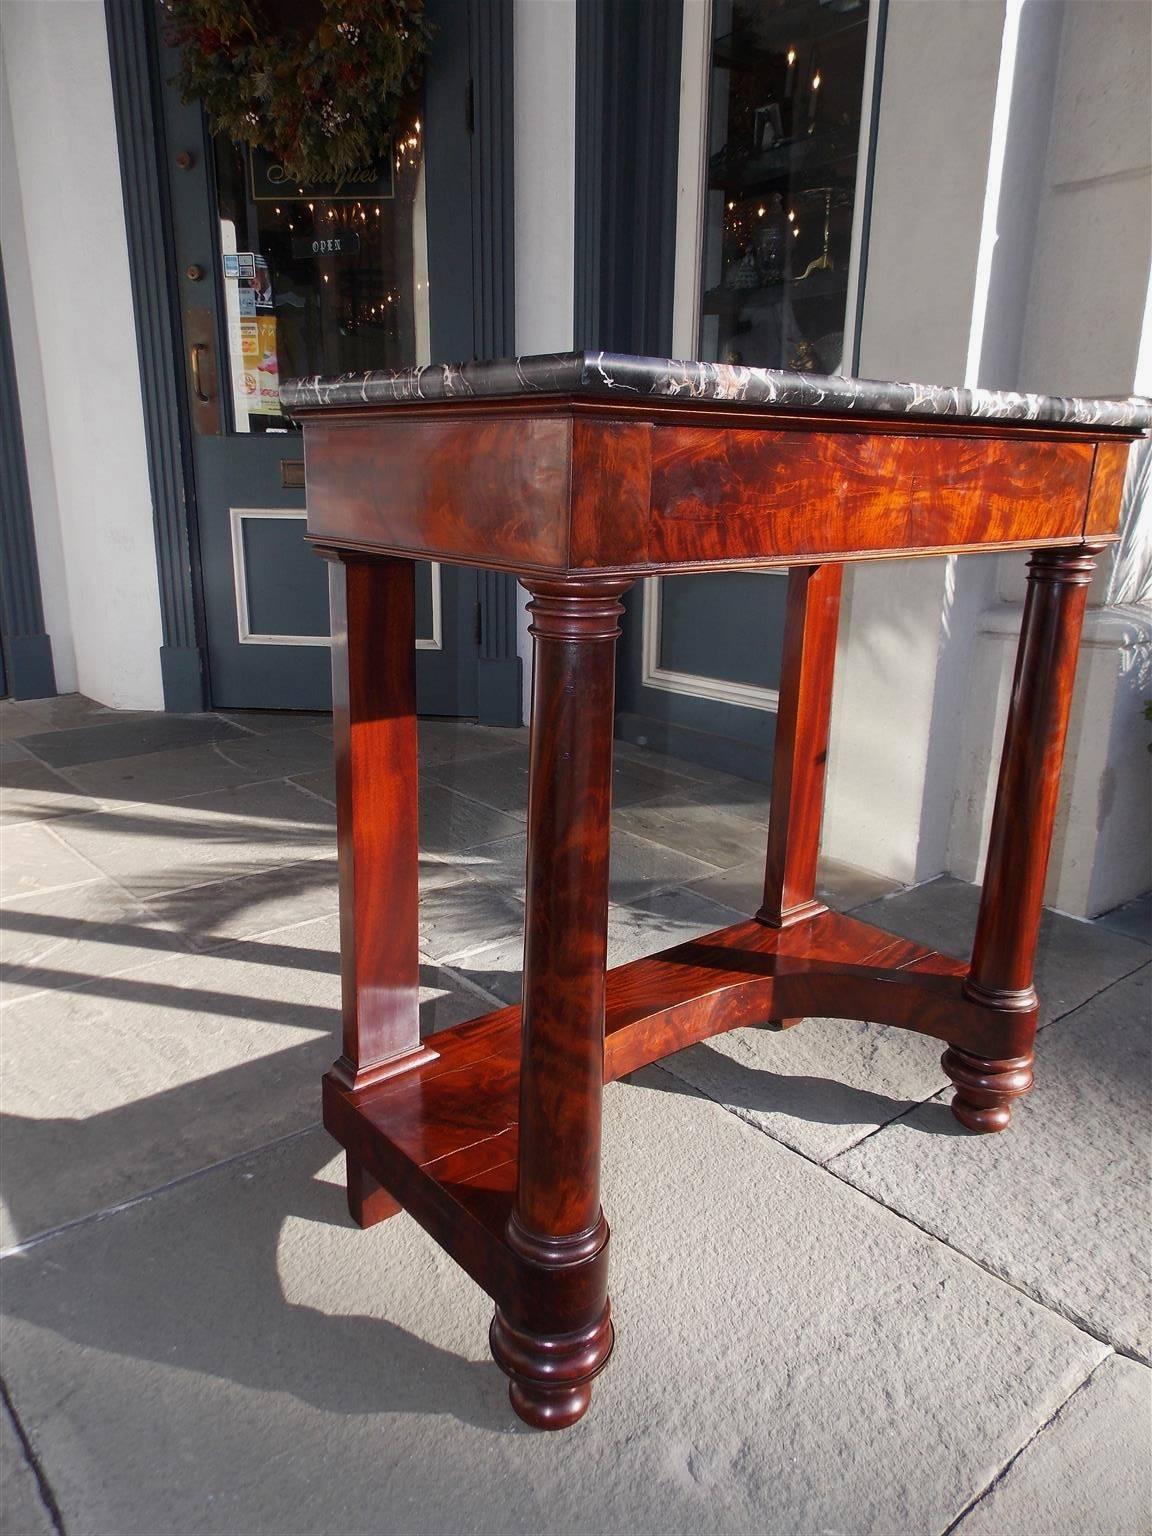 Hand-Carved American Classsical Mahogany and Marble-Top Console, Balt, MD, Circa 1820